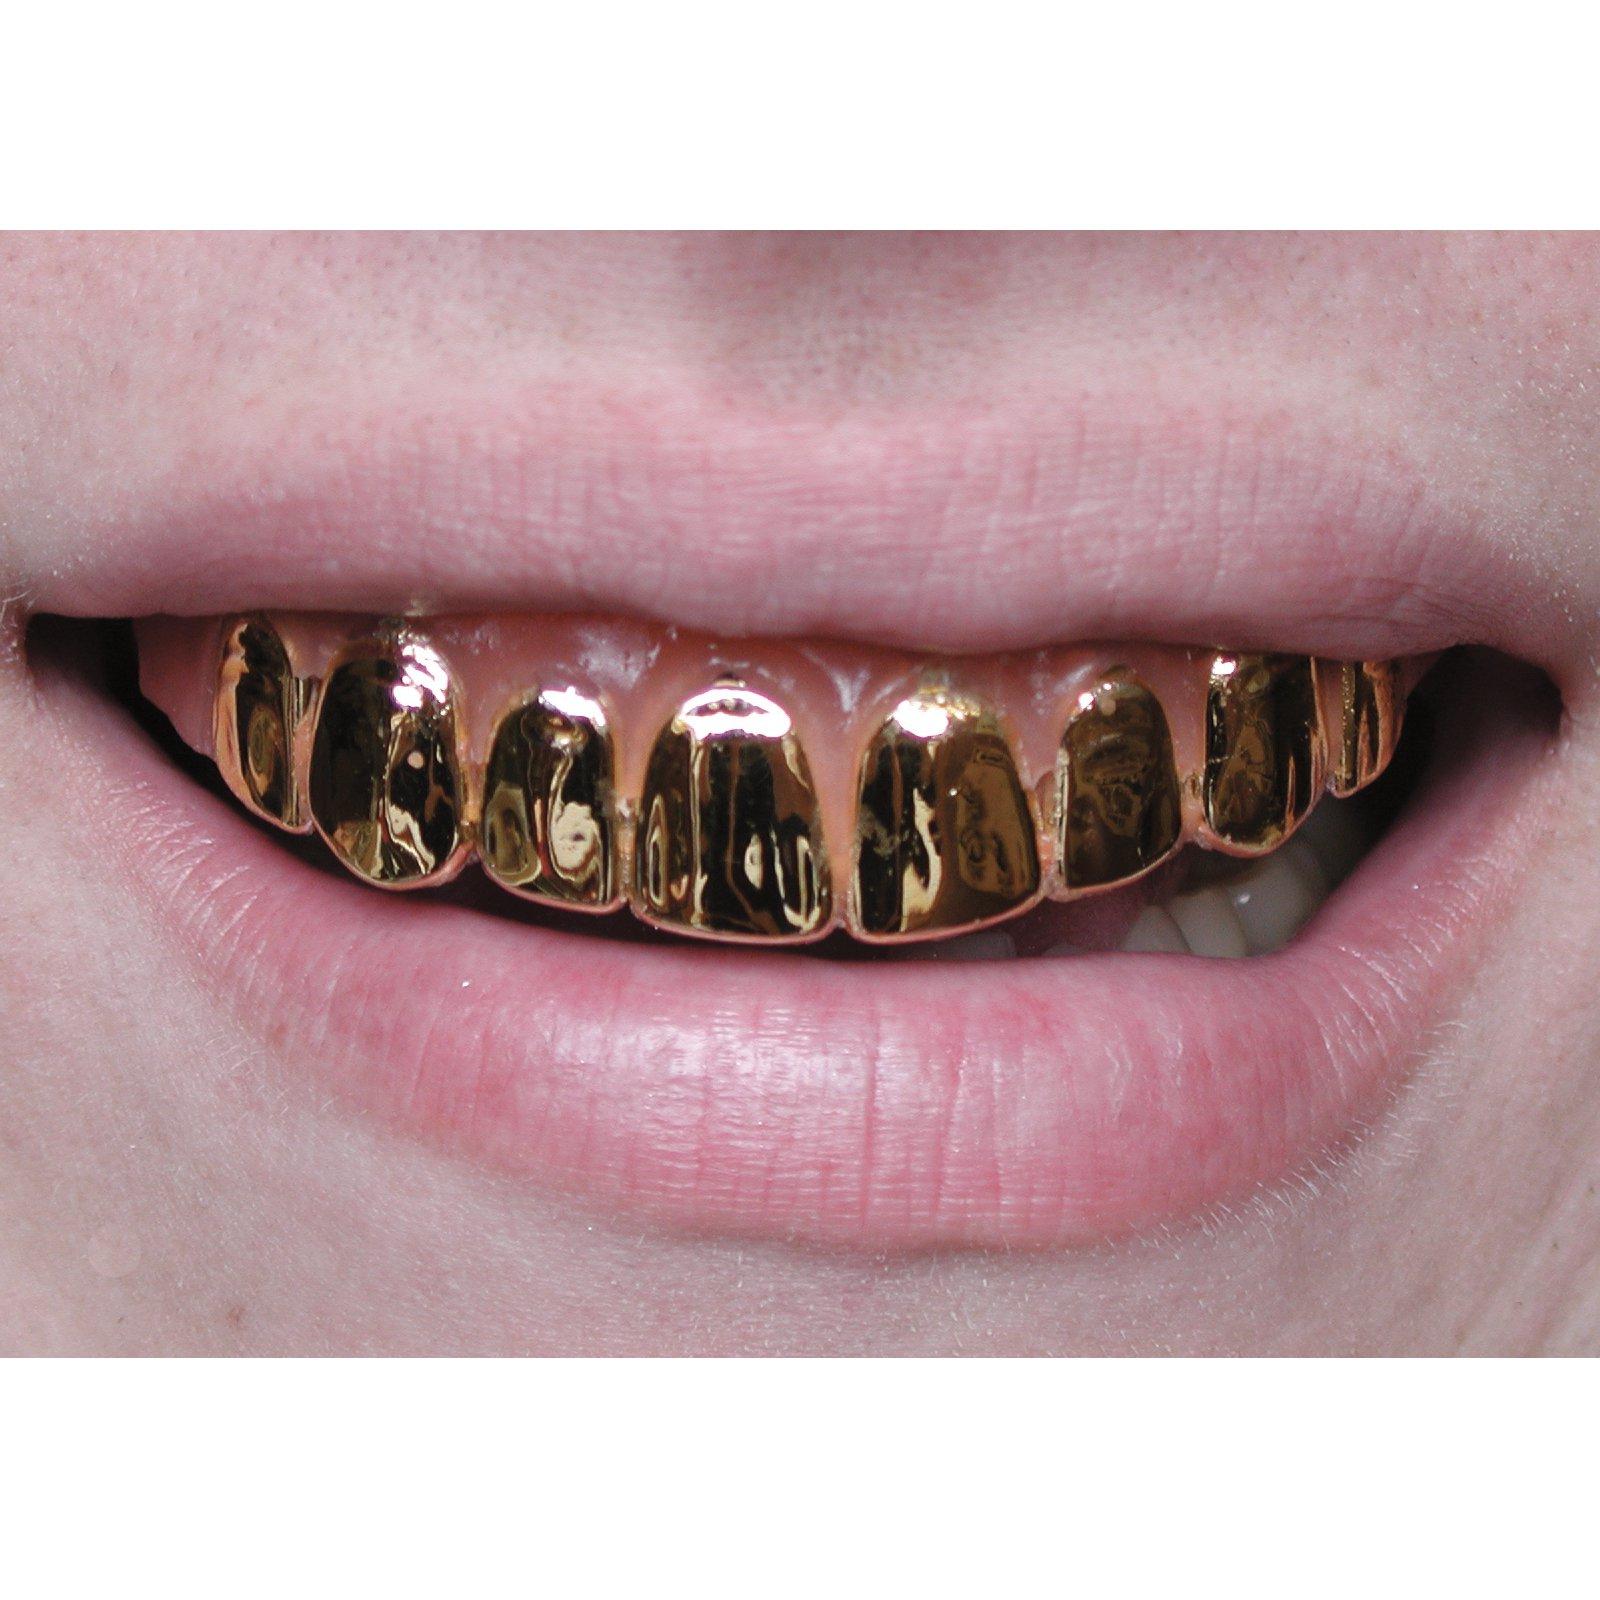 Gold teeth from God?